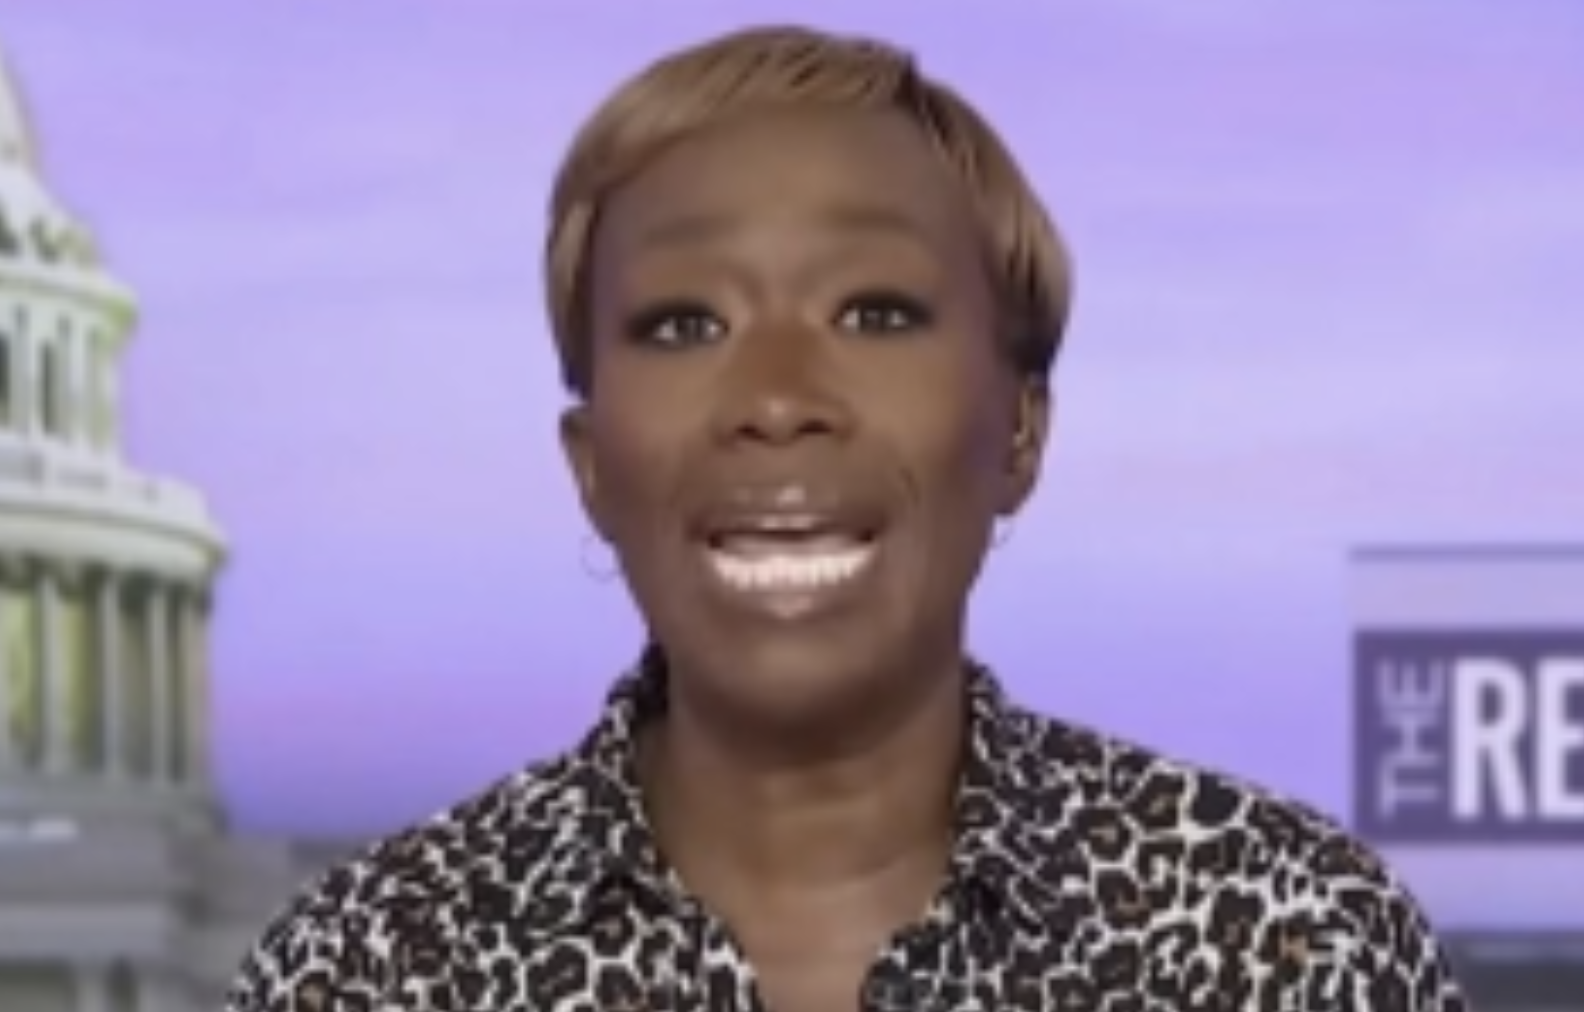 Twitter Ruthlessly Mocks Joy Reid After She Says Harvard Only Accepted Her "Because of Affirmative Action"